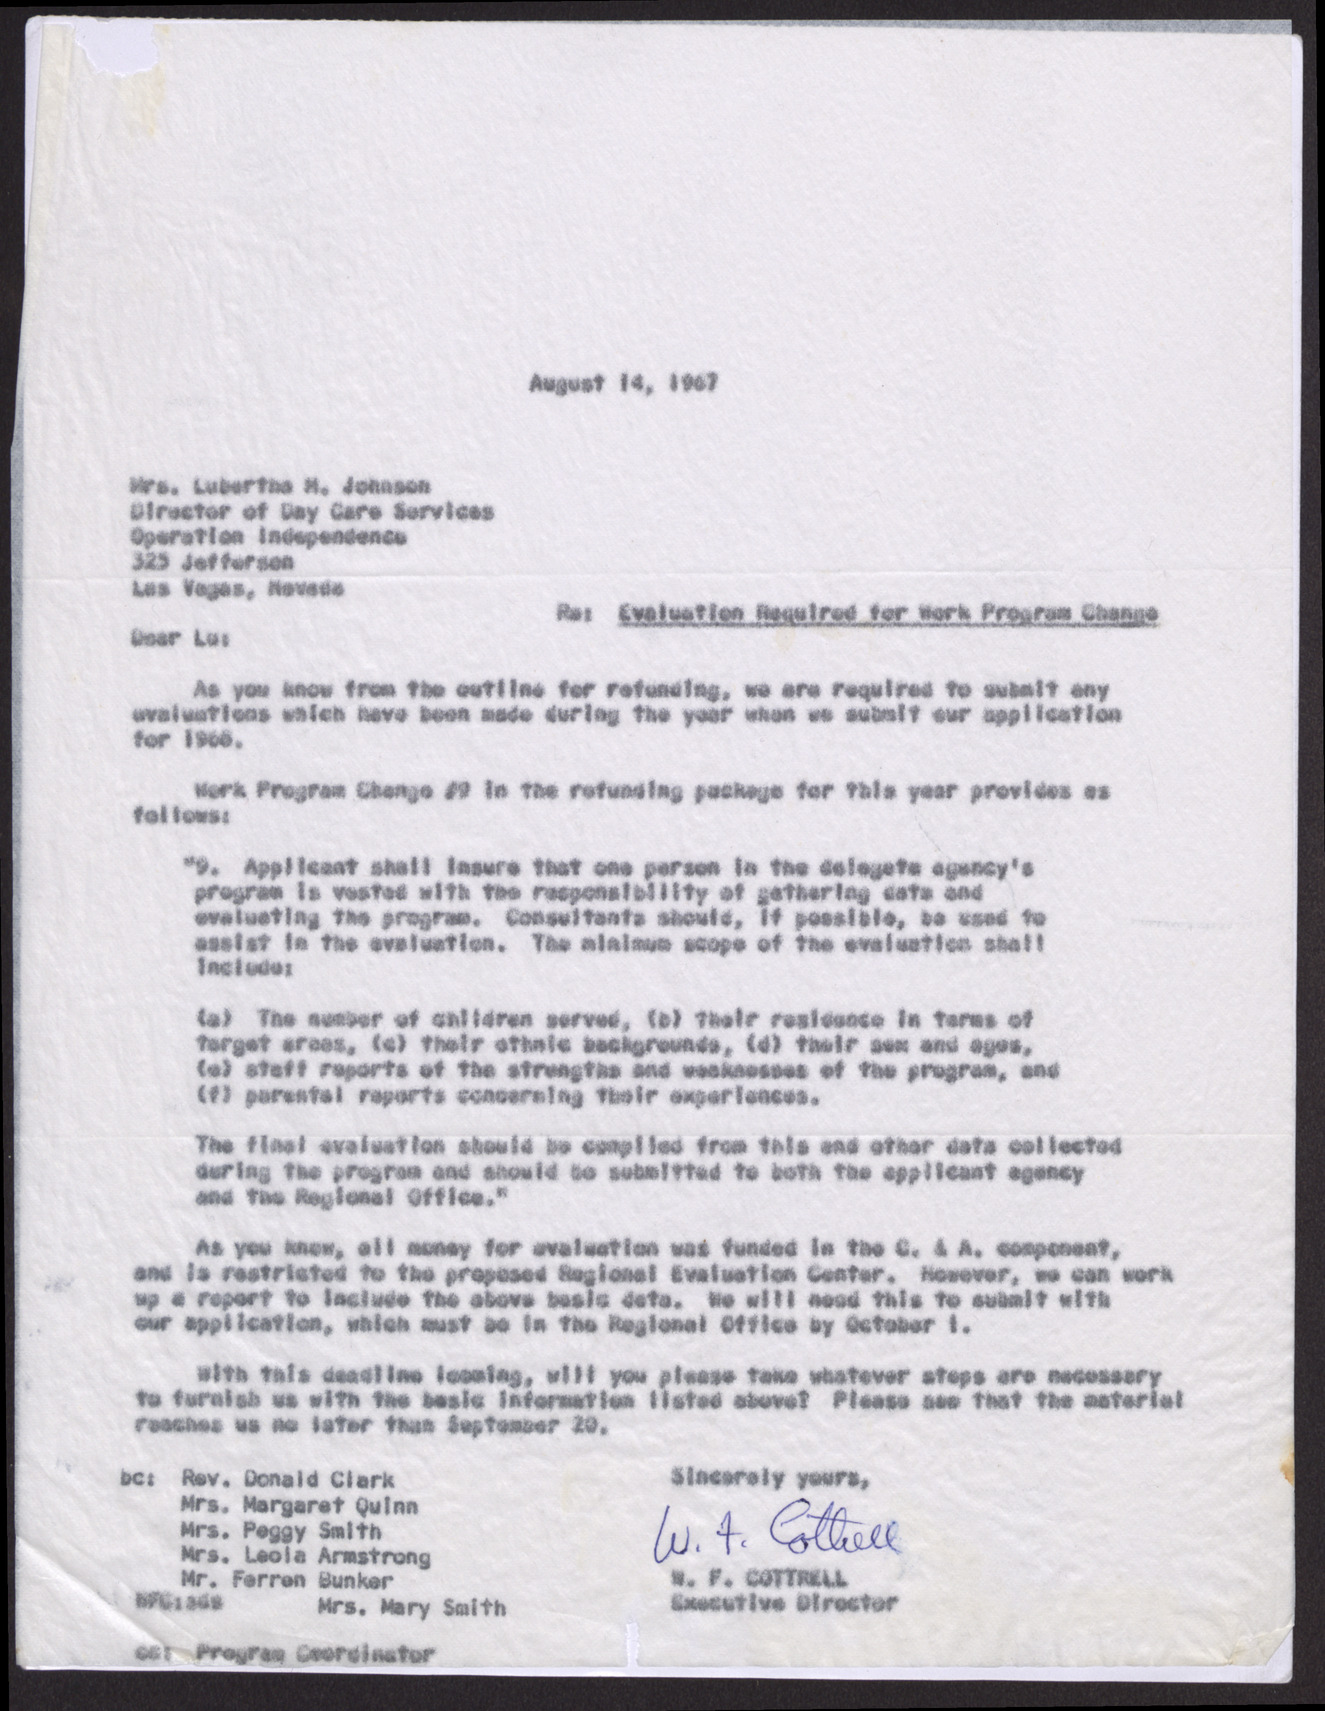 Letter to Mrs. Lubertha M. Johnson from W. F. Cottrell, August 14, 1967